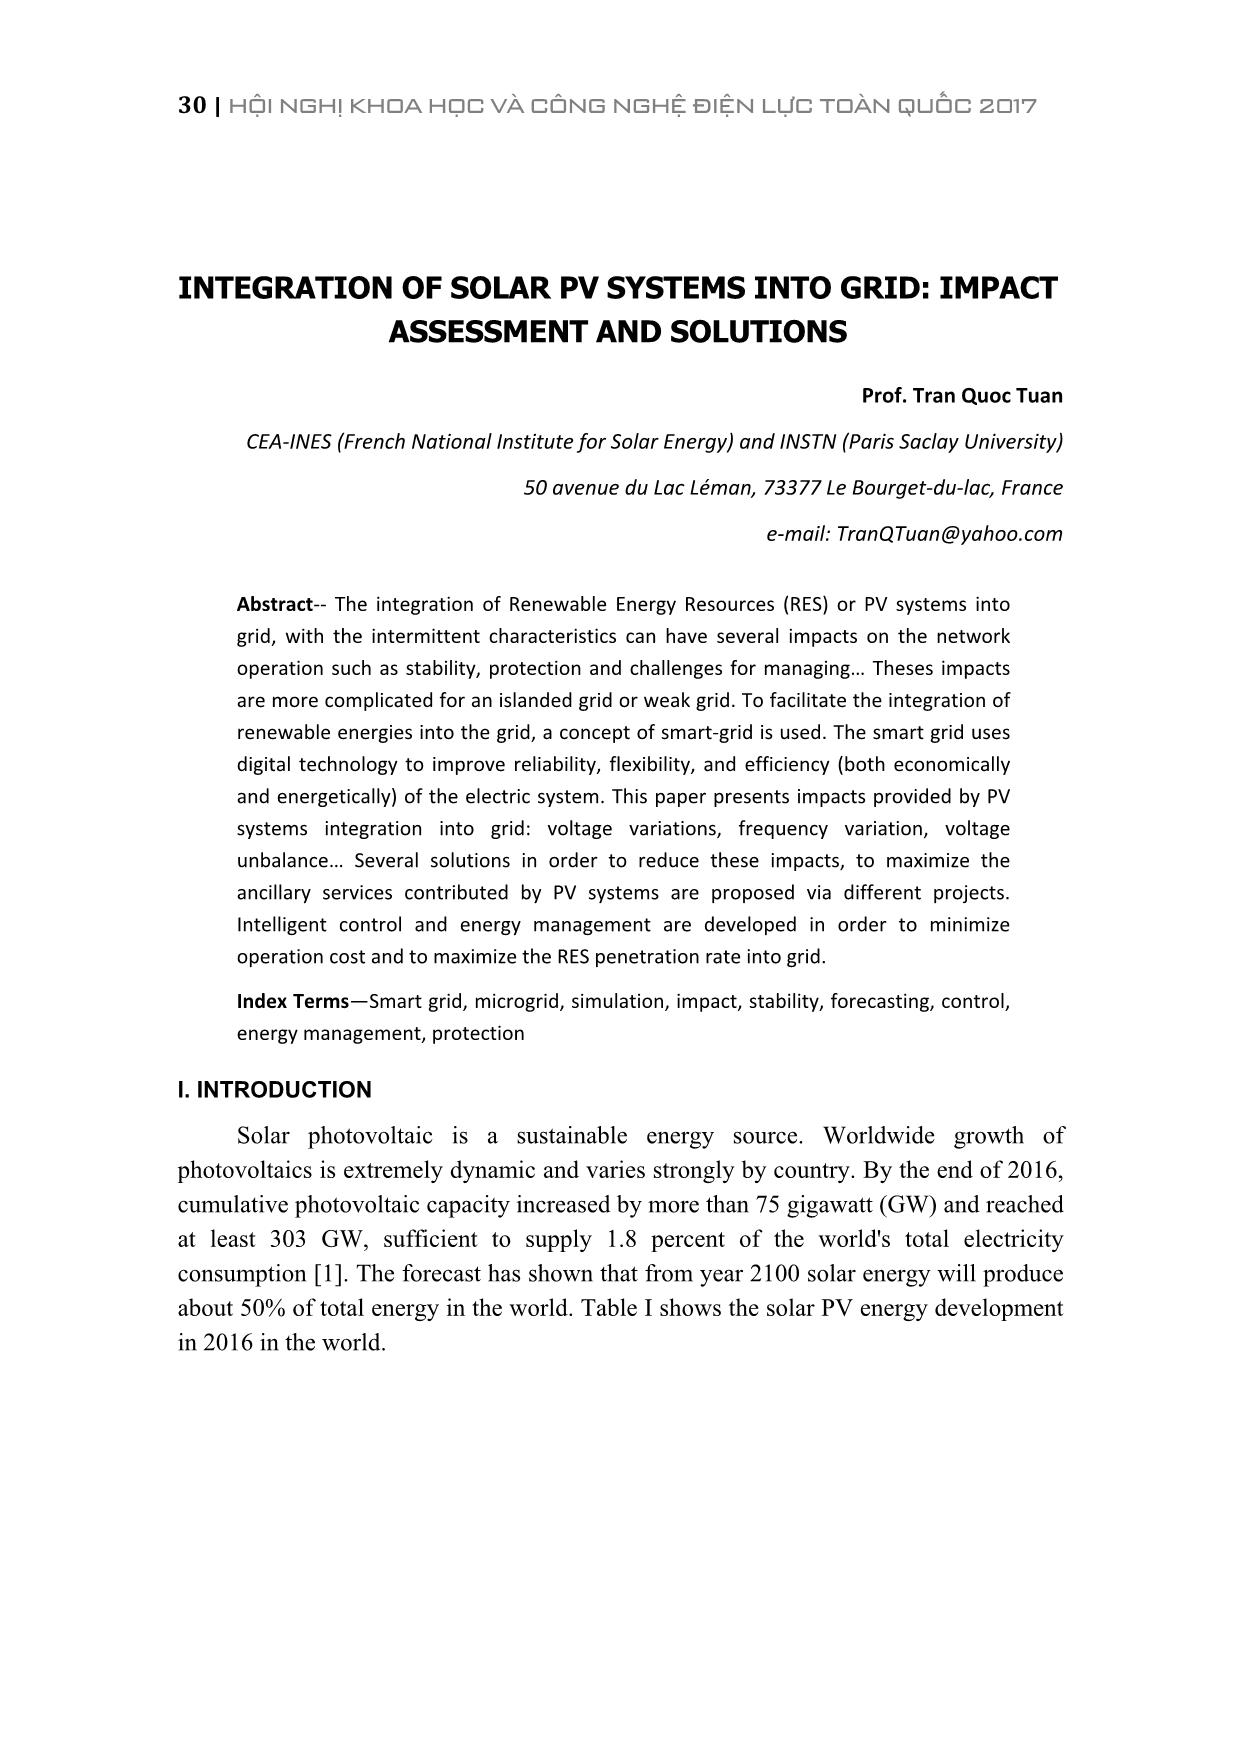 Integration of solar pv systems into grid: Impact assessment and solutions trang 1